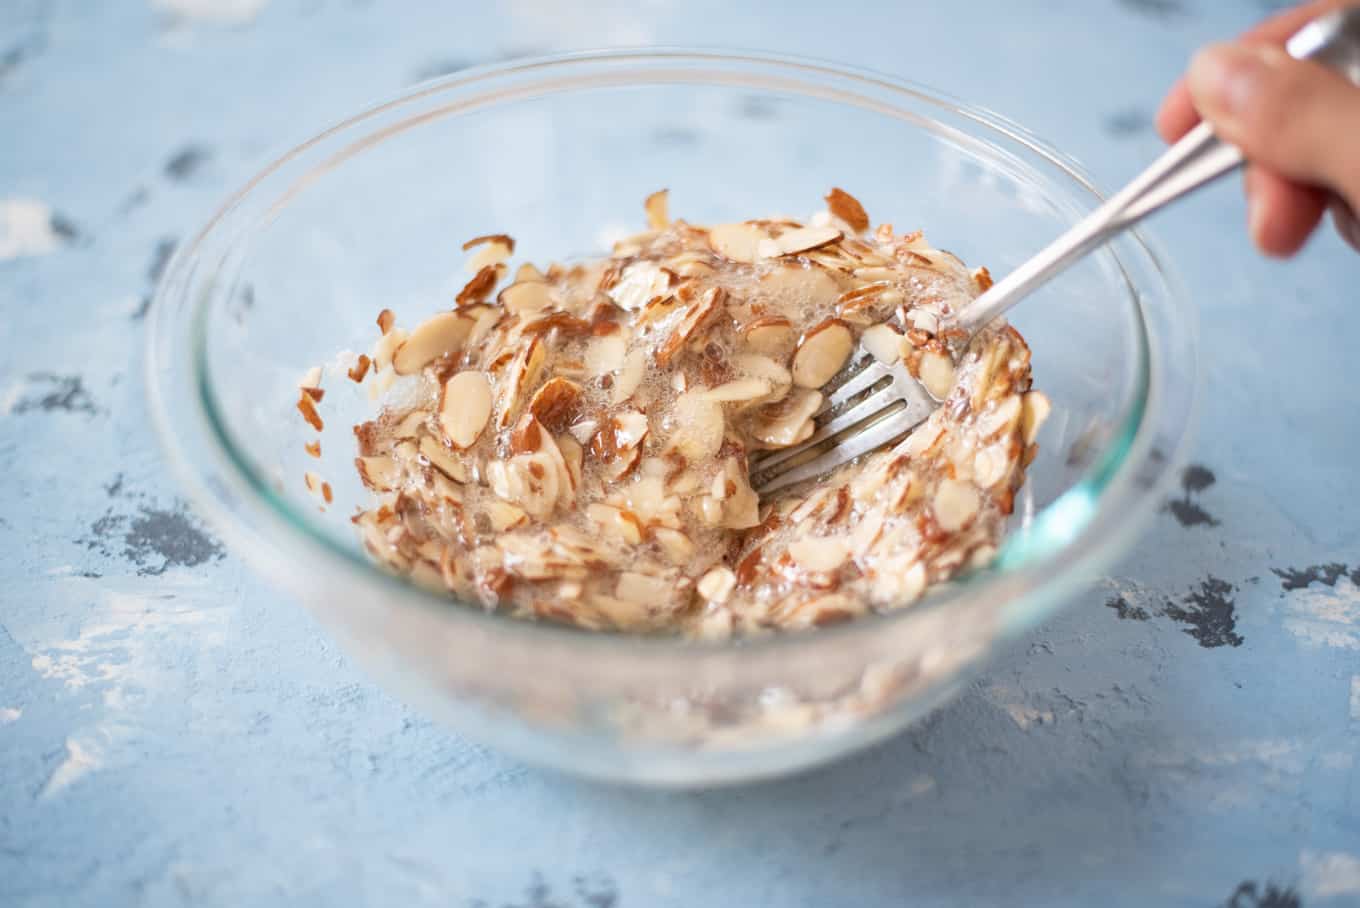 A mixture of sliced almonds, sugar, and egg whites in a small glass bowl.